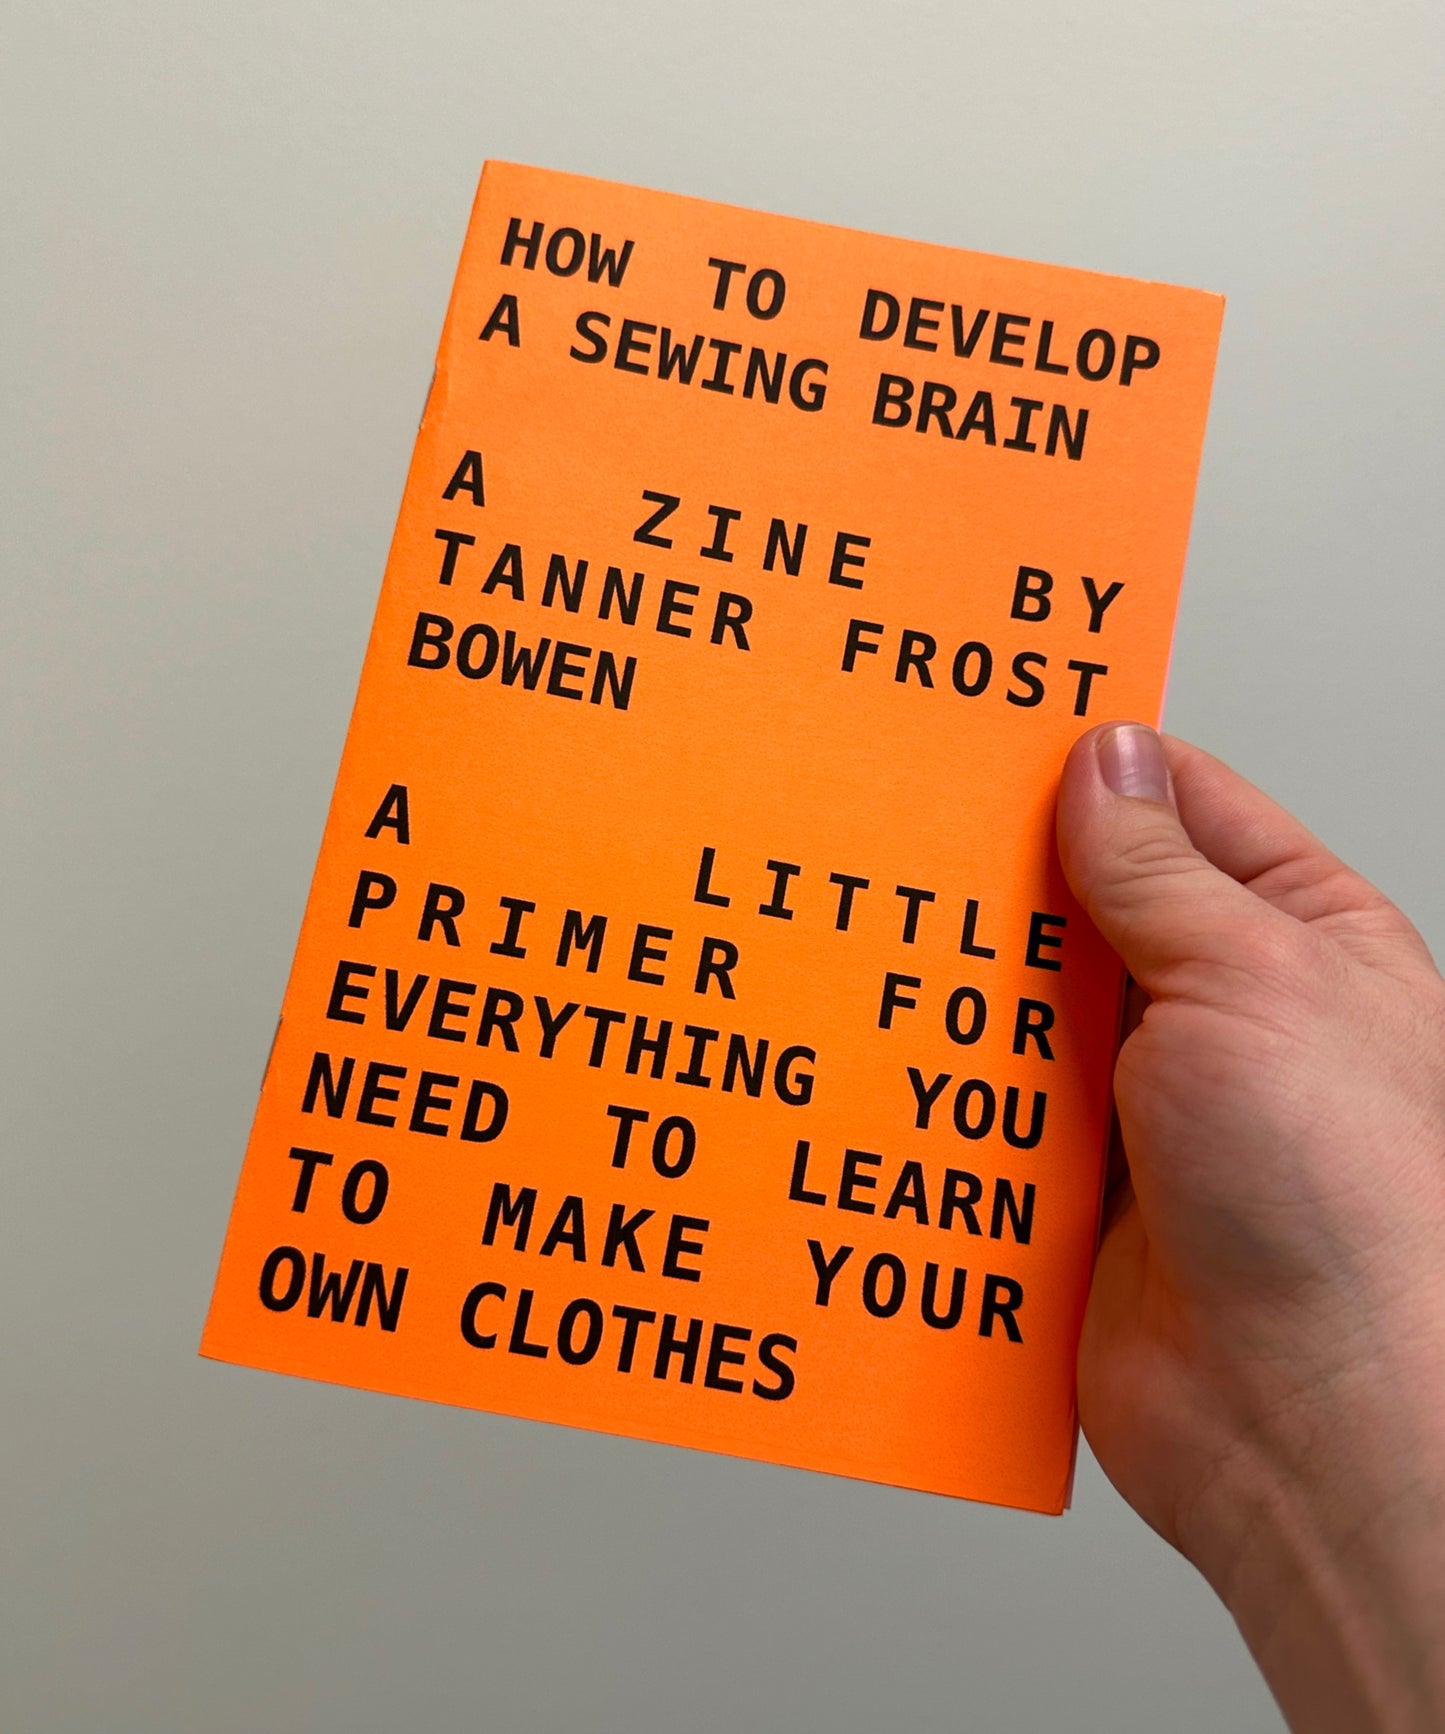 How to Develop a Sewing Brain Zine